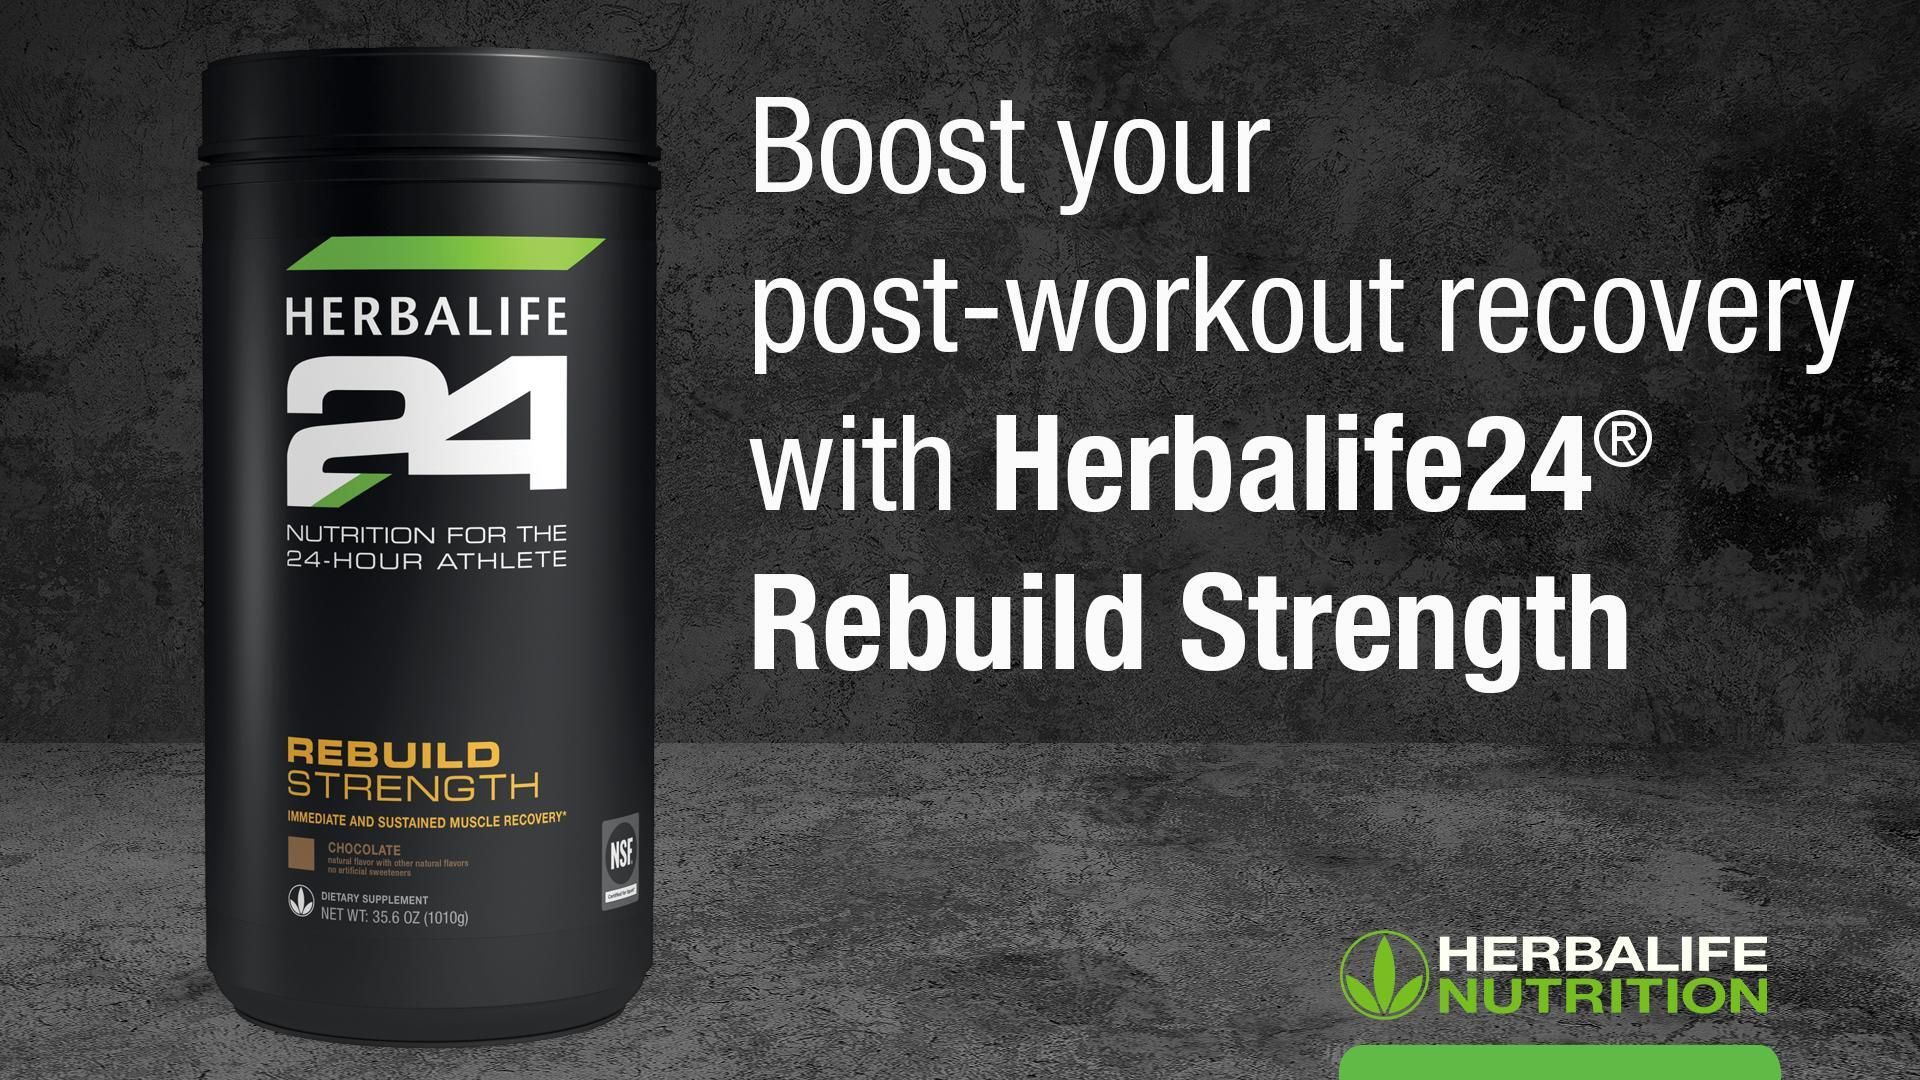 Herbalife24® Rebuild Strength: Know the Products